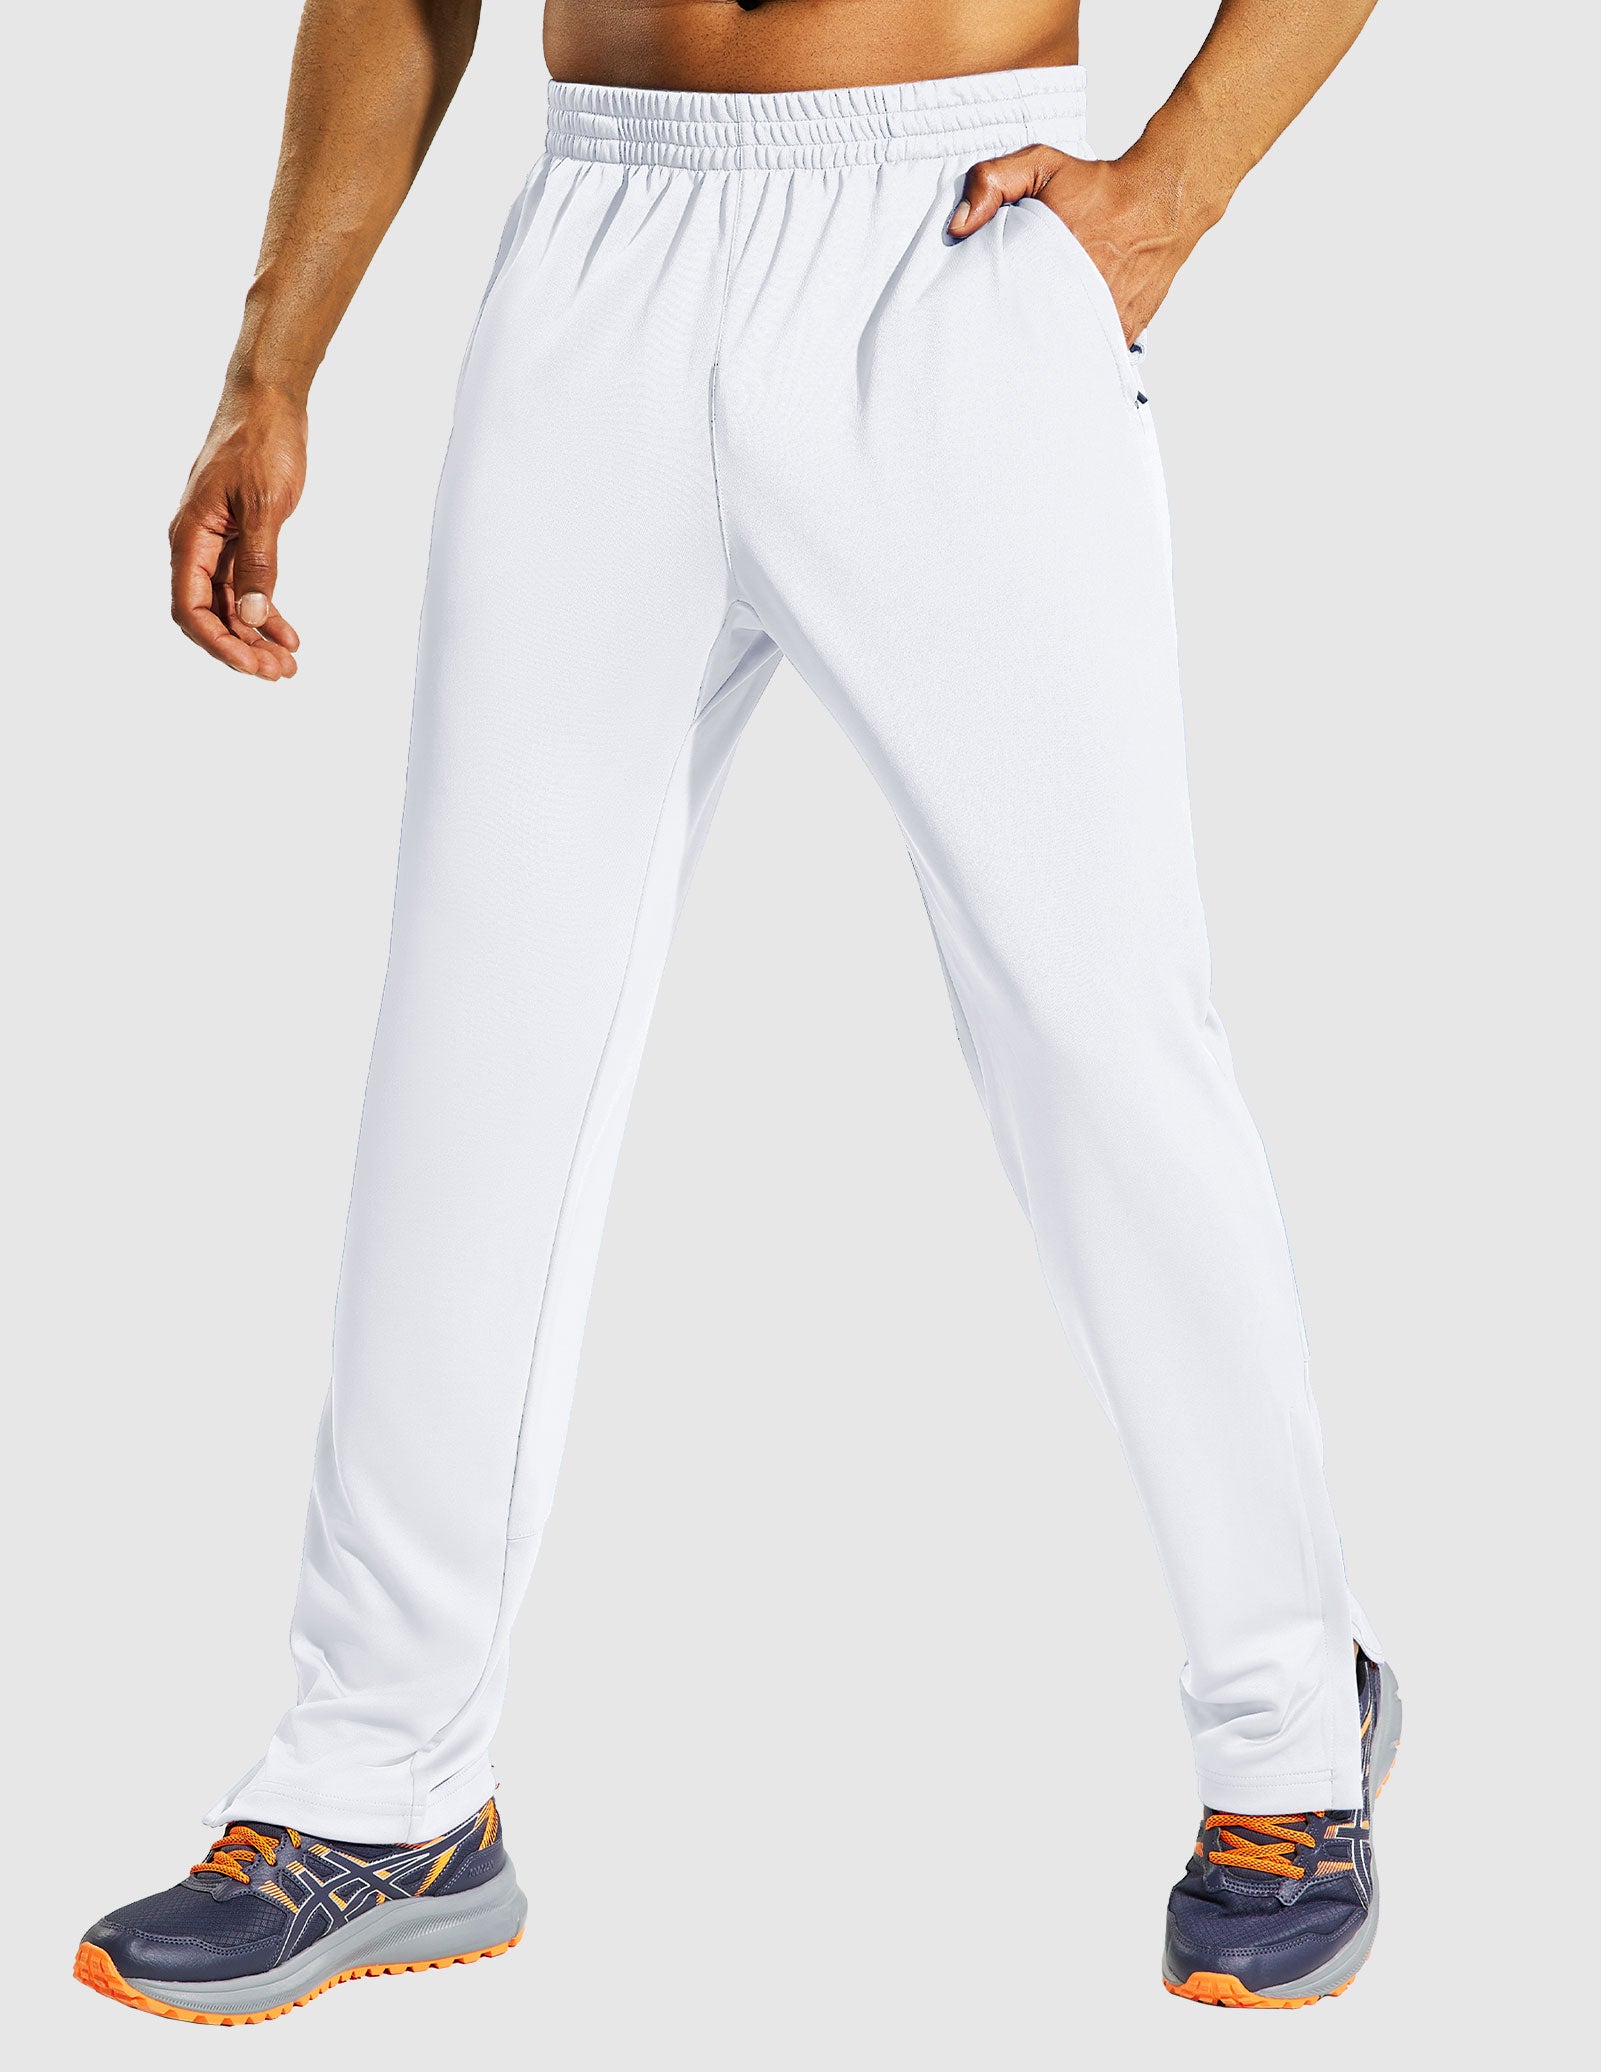 Men’s Sweatpants with Pockets Athletic Track Joggers